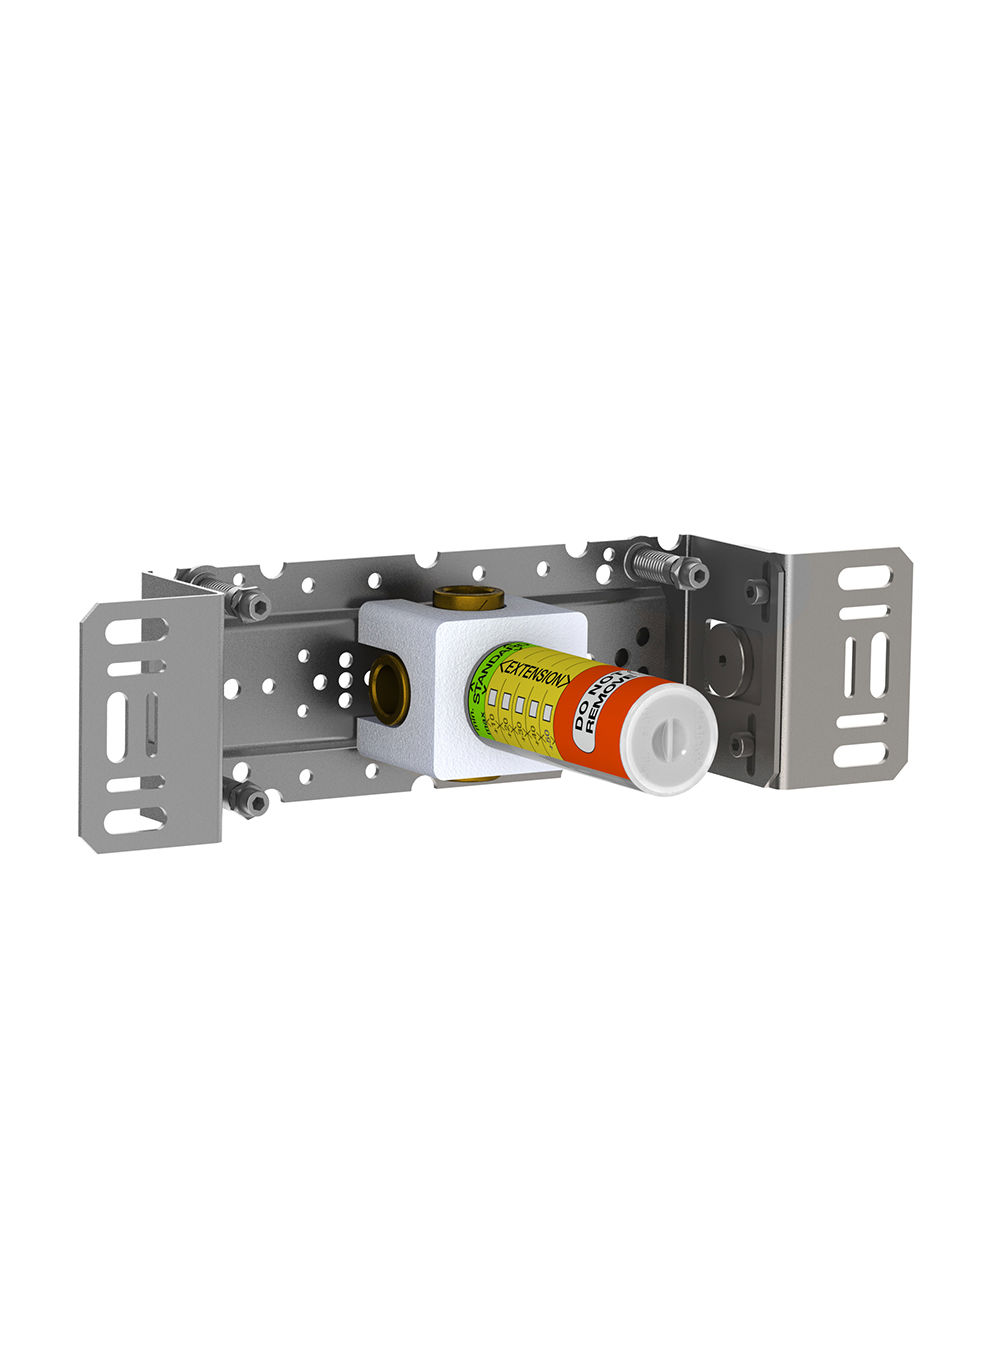 400DV: Separate diverter. ½" connection to copper, steel, iron or pex pipe work.